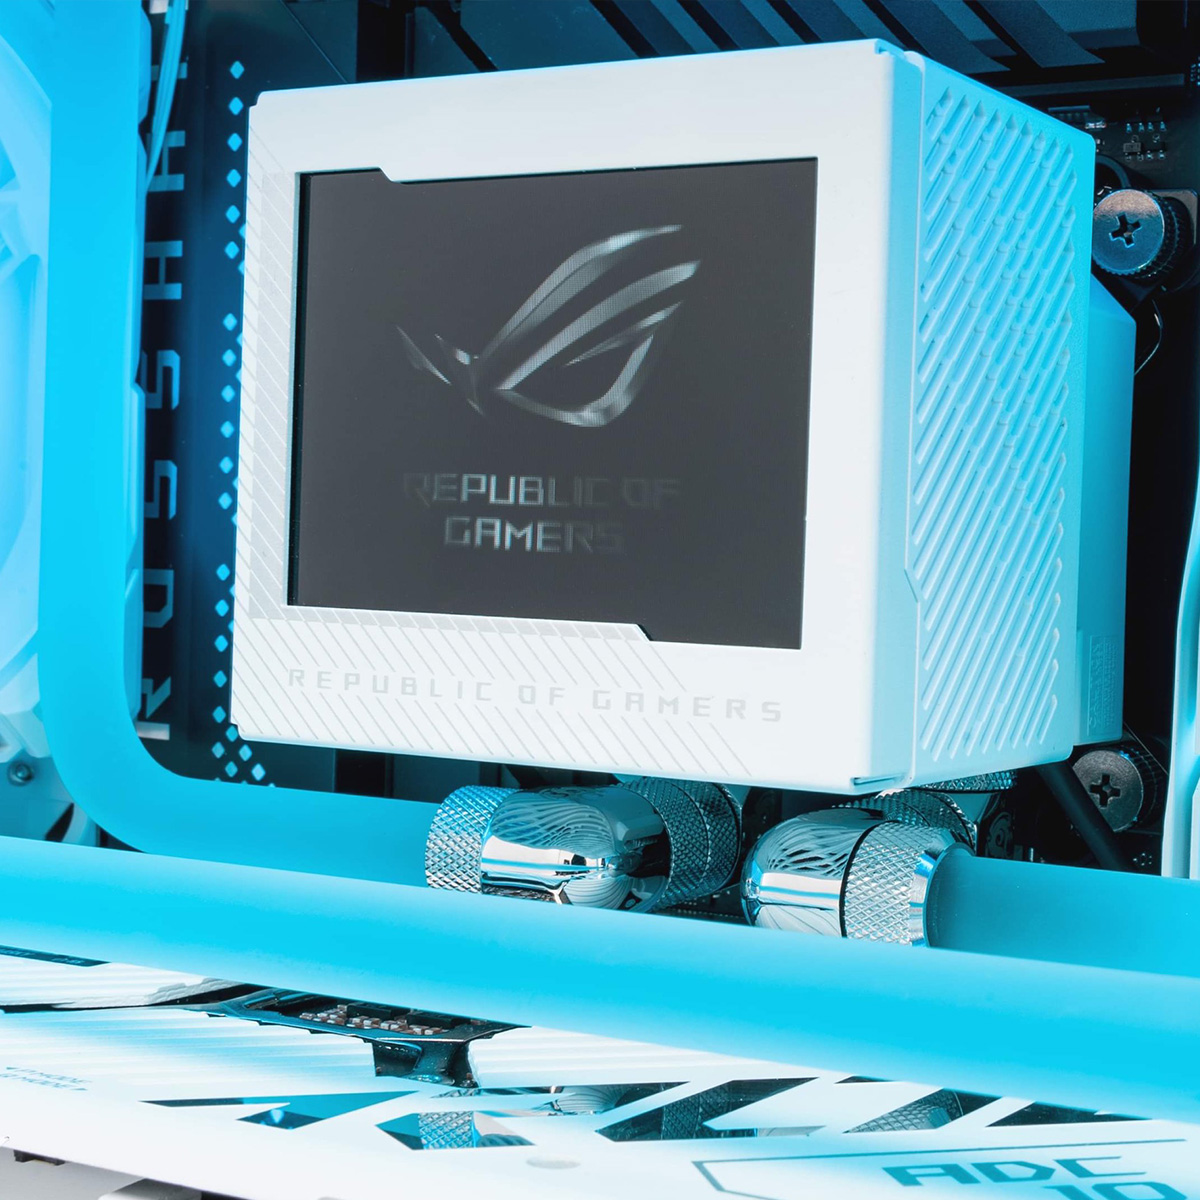 Check out the brand-new prototype of ROG Water Block at #Computex2023.

☑️ ROG Ryujin III Style to fit high-end mobos
☑️ 3.5'' Full-Color LCD Screen to display live system stats or your custom GIFs
☑️ Asetek's innovative cold plate tech

Meet👉 rog.gg/rogwaterblock